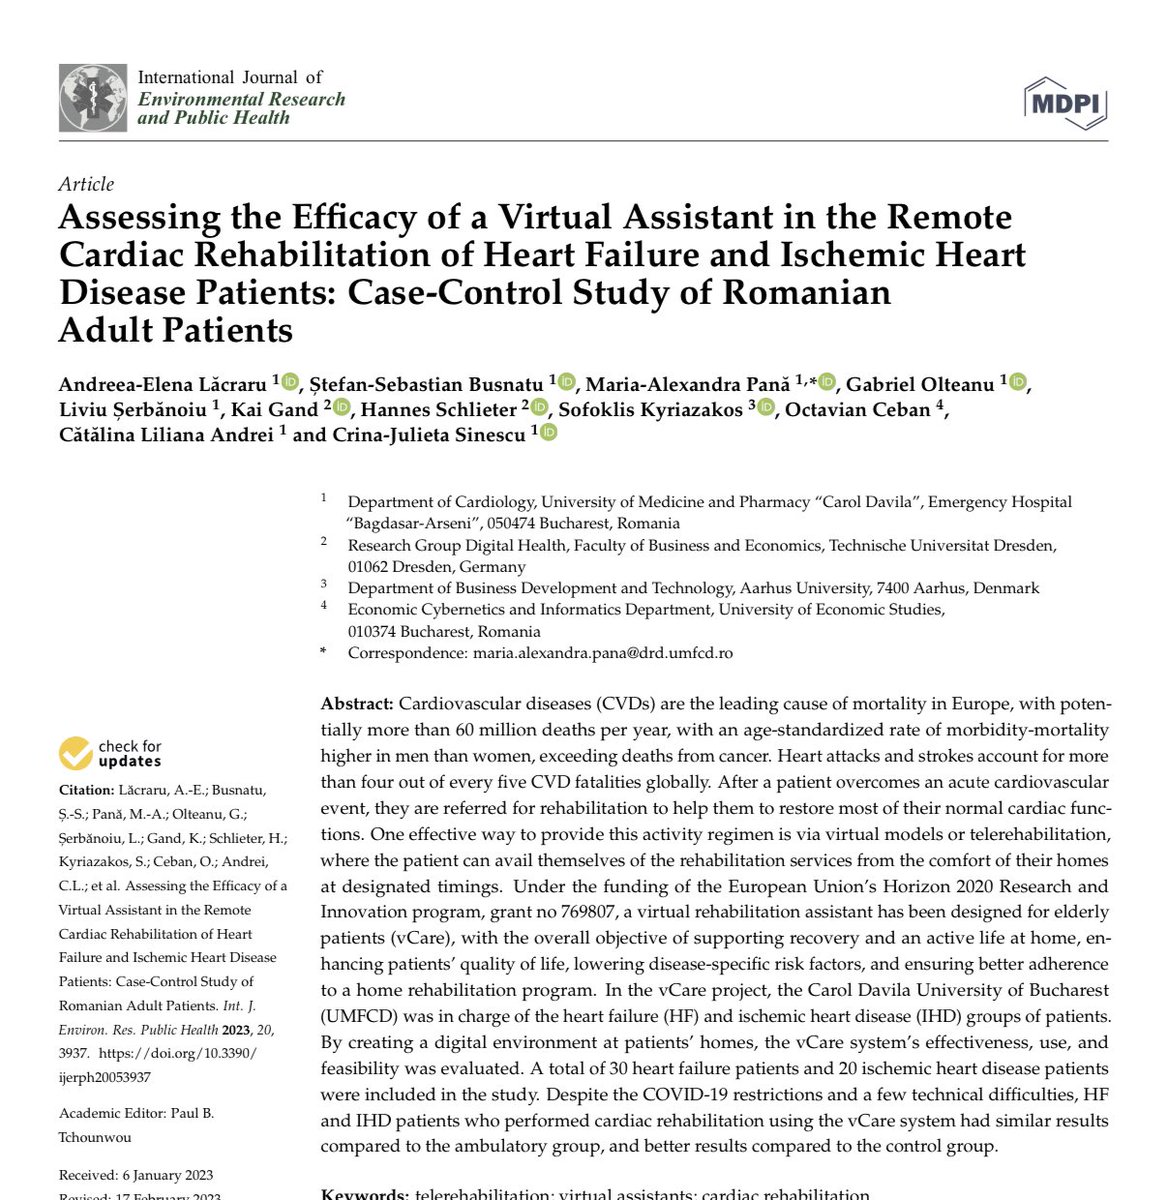 Just published our finals results of the Virtual Coaching Activities for Rehabilitation in elderly Project. It was a beautiful international collaboration and I am very proud to have been part of it. ▶️ https://www.mdpi.com1660-4601/20/5/3937